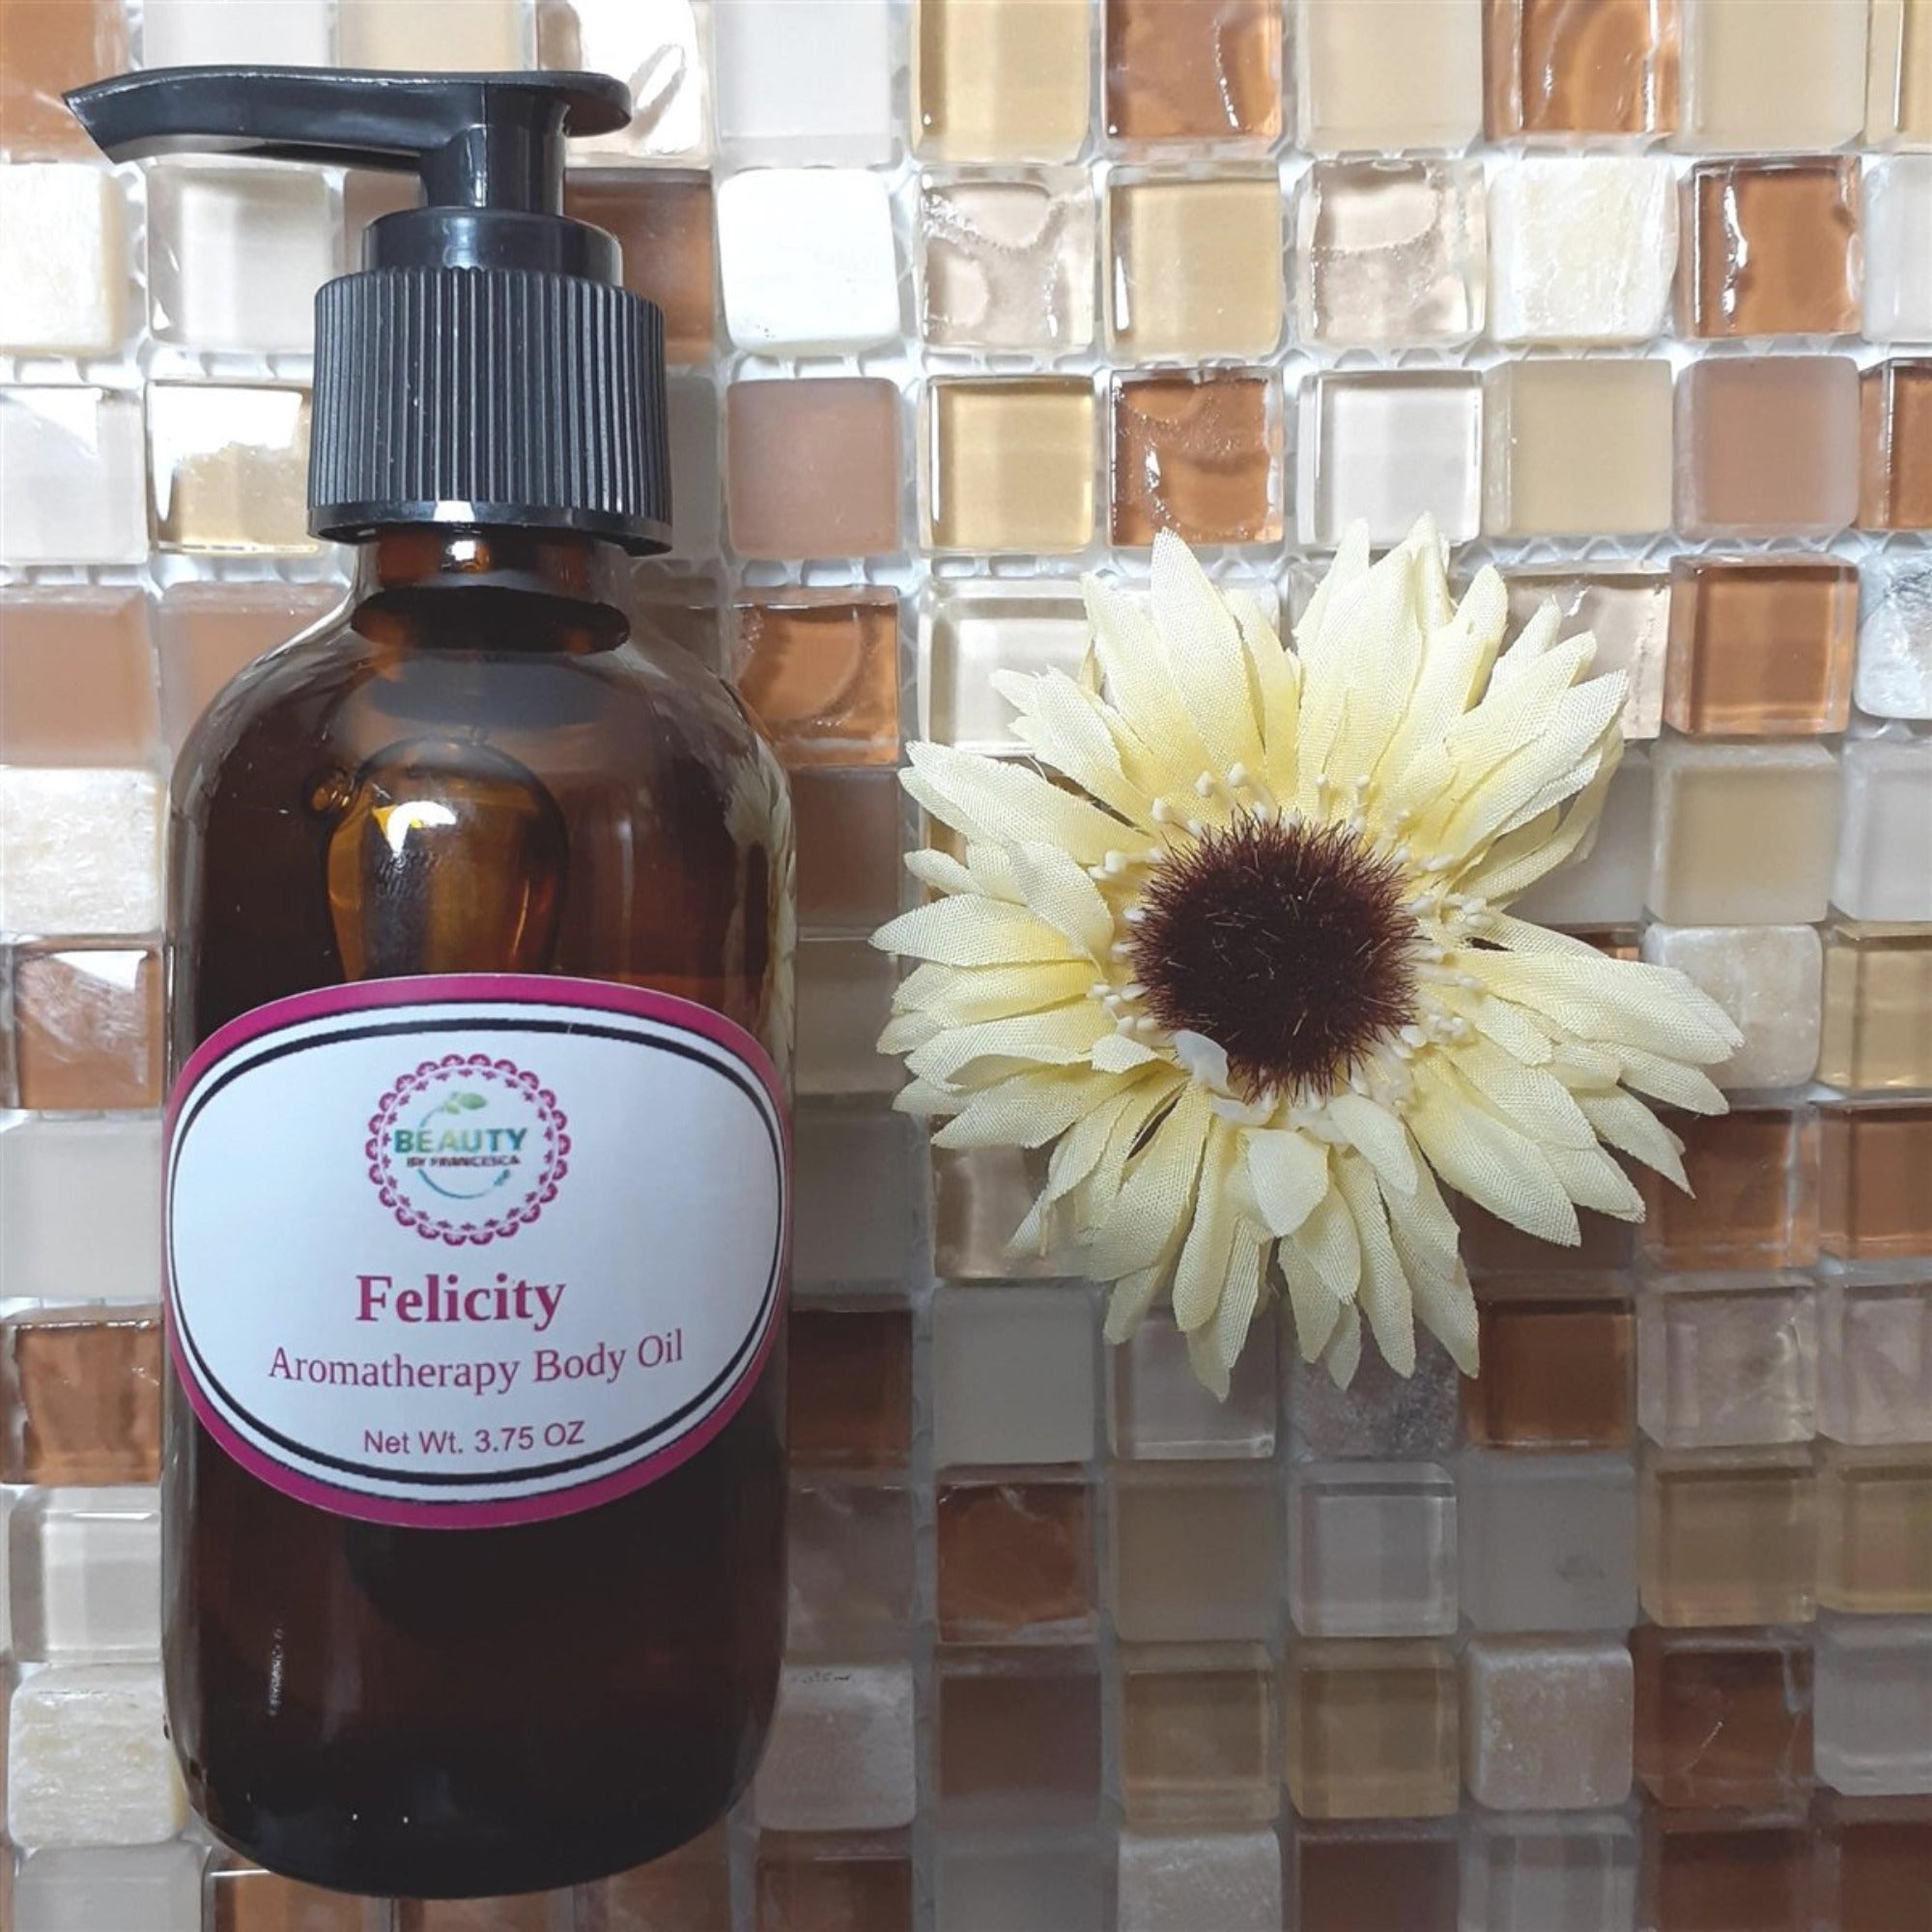 Felicity aromatherapy body oil with flower